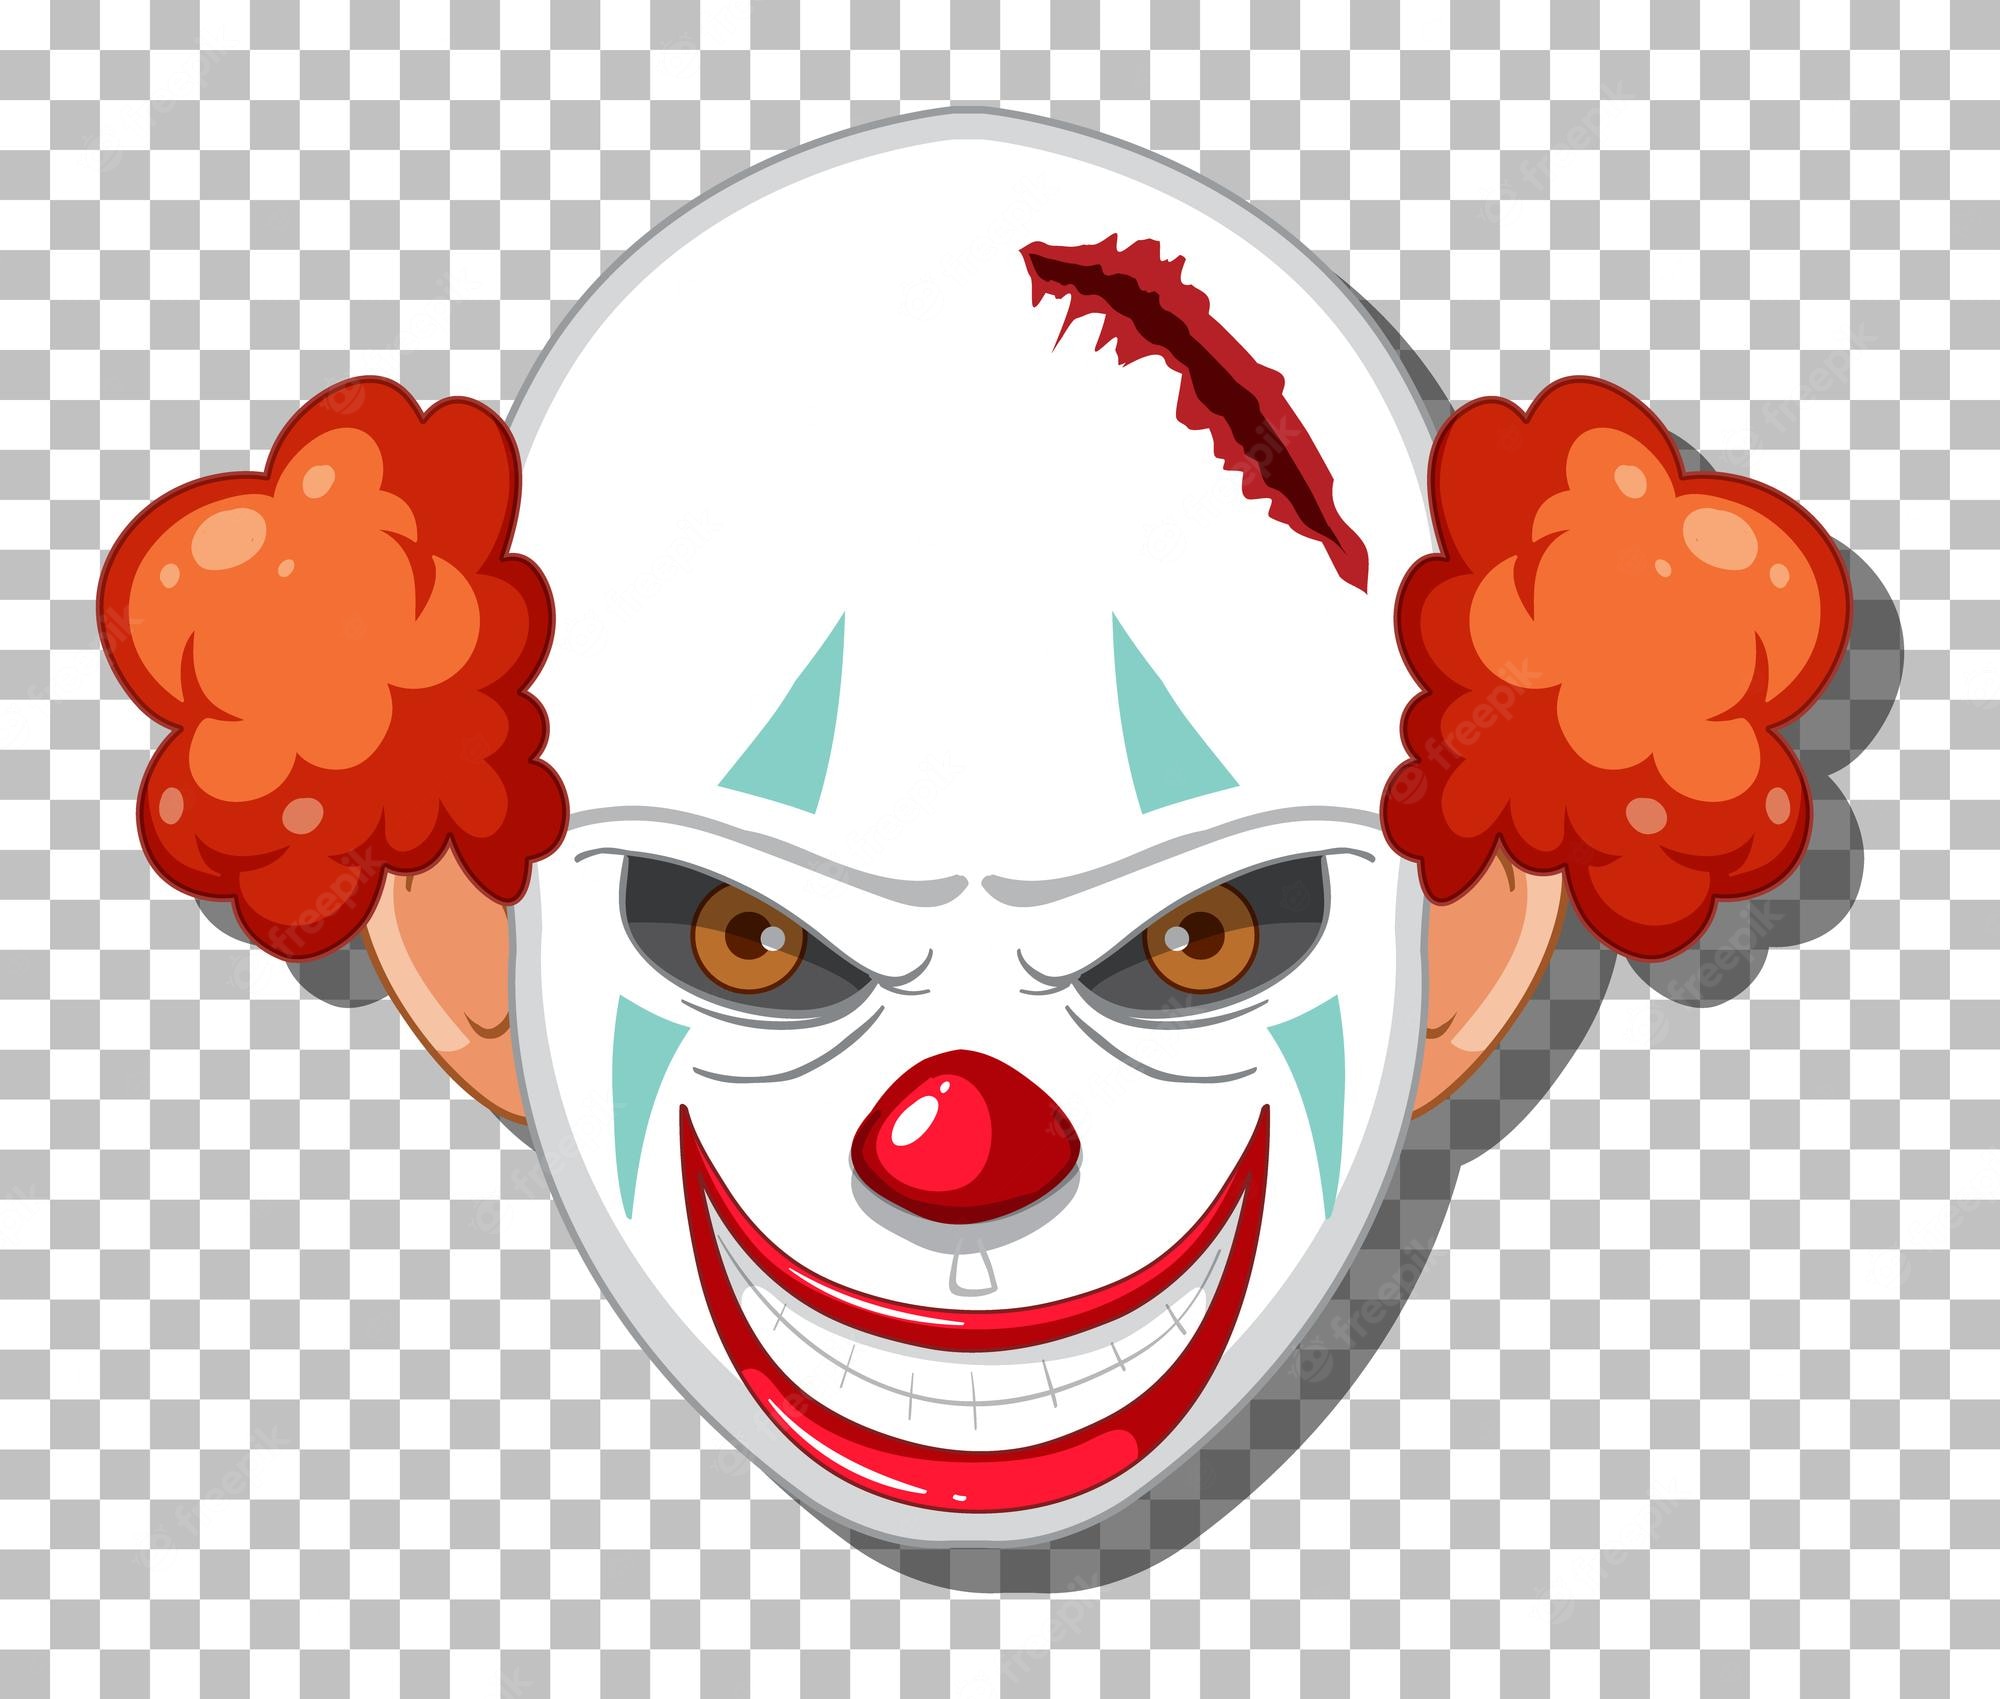 Scary Clowns Backgrounds